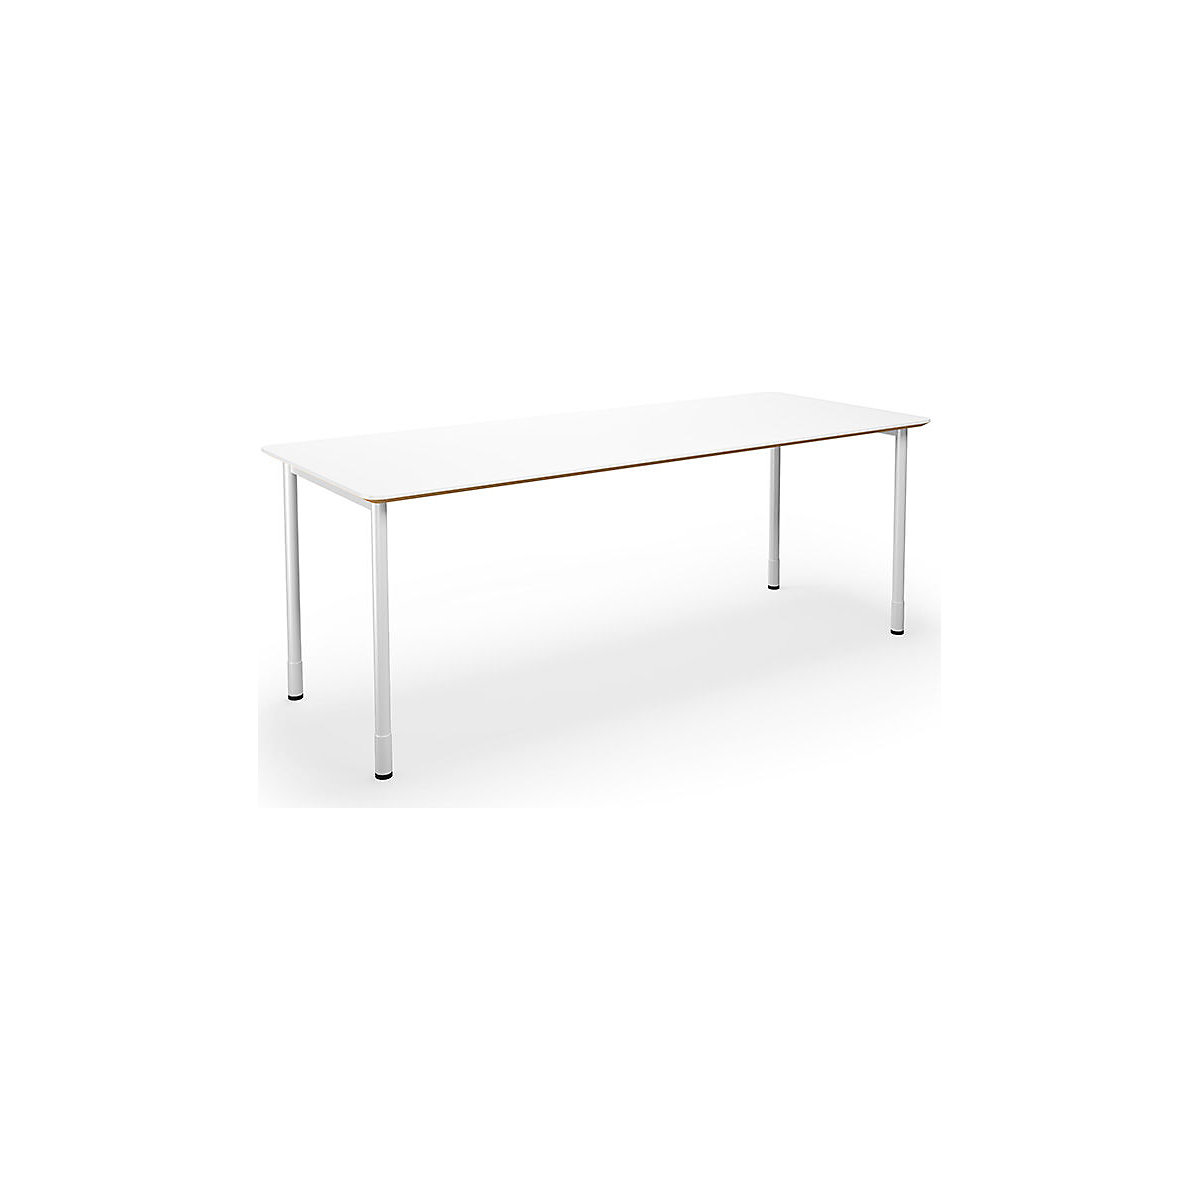 DUO-C Trend multi-purpose desk, straight tabletop, rounded corners, WxD 2000 x 800 mm, white, white-1